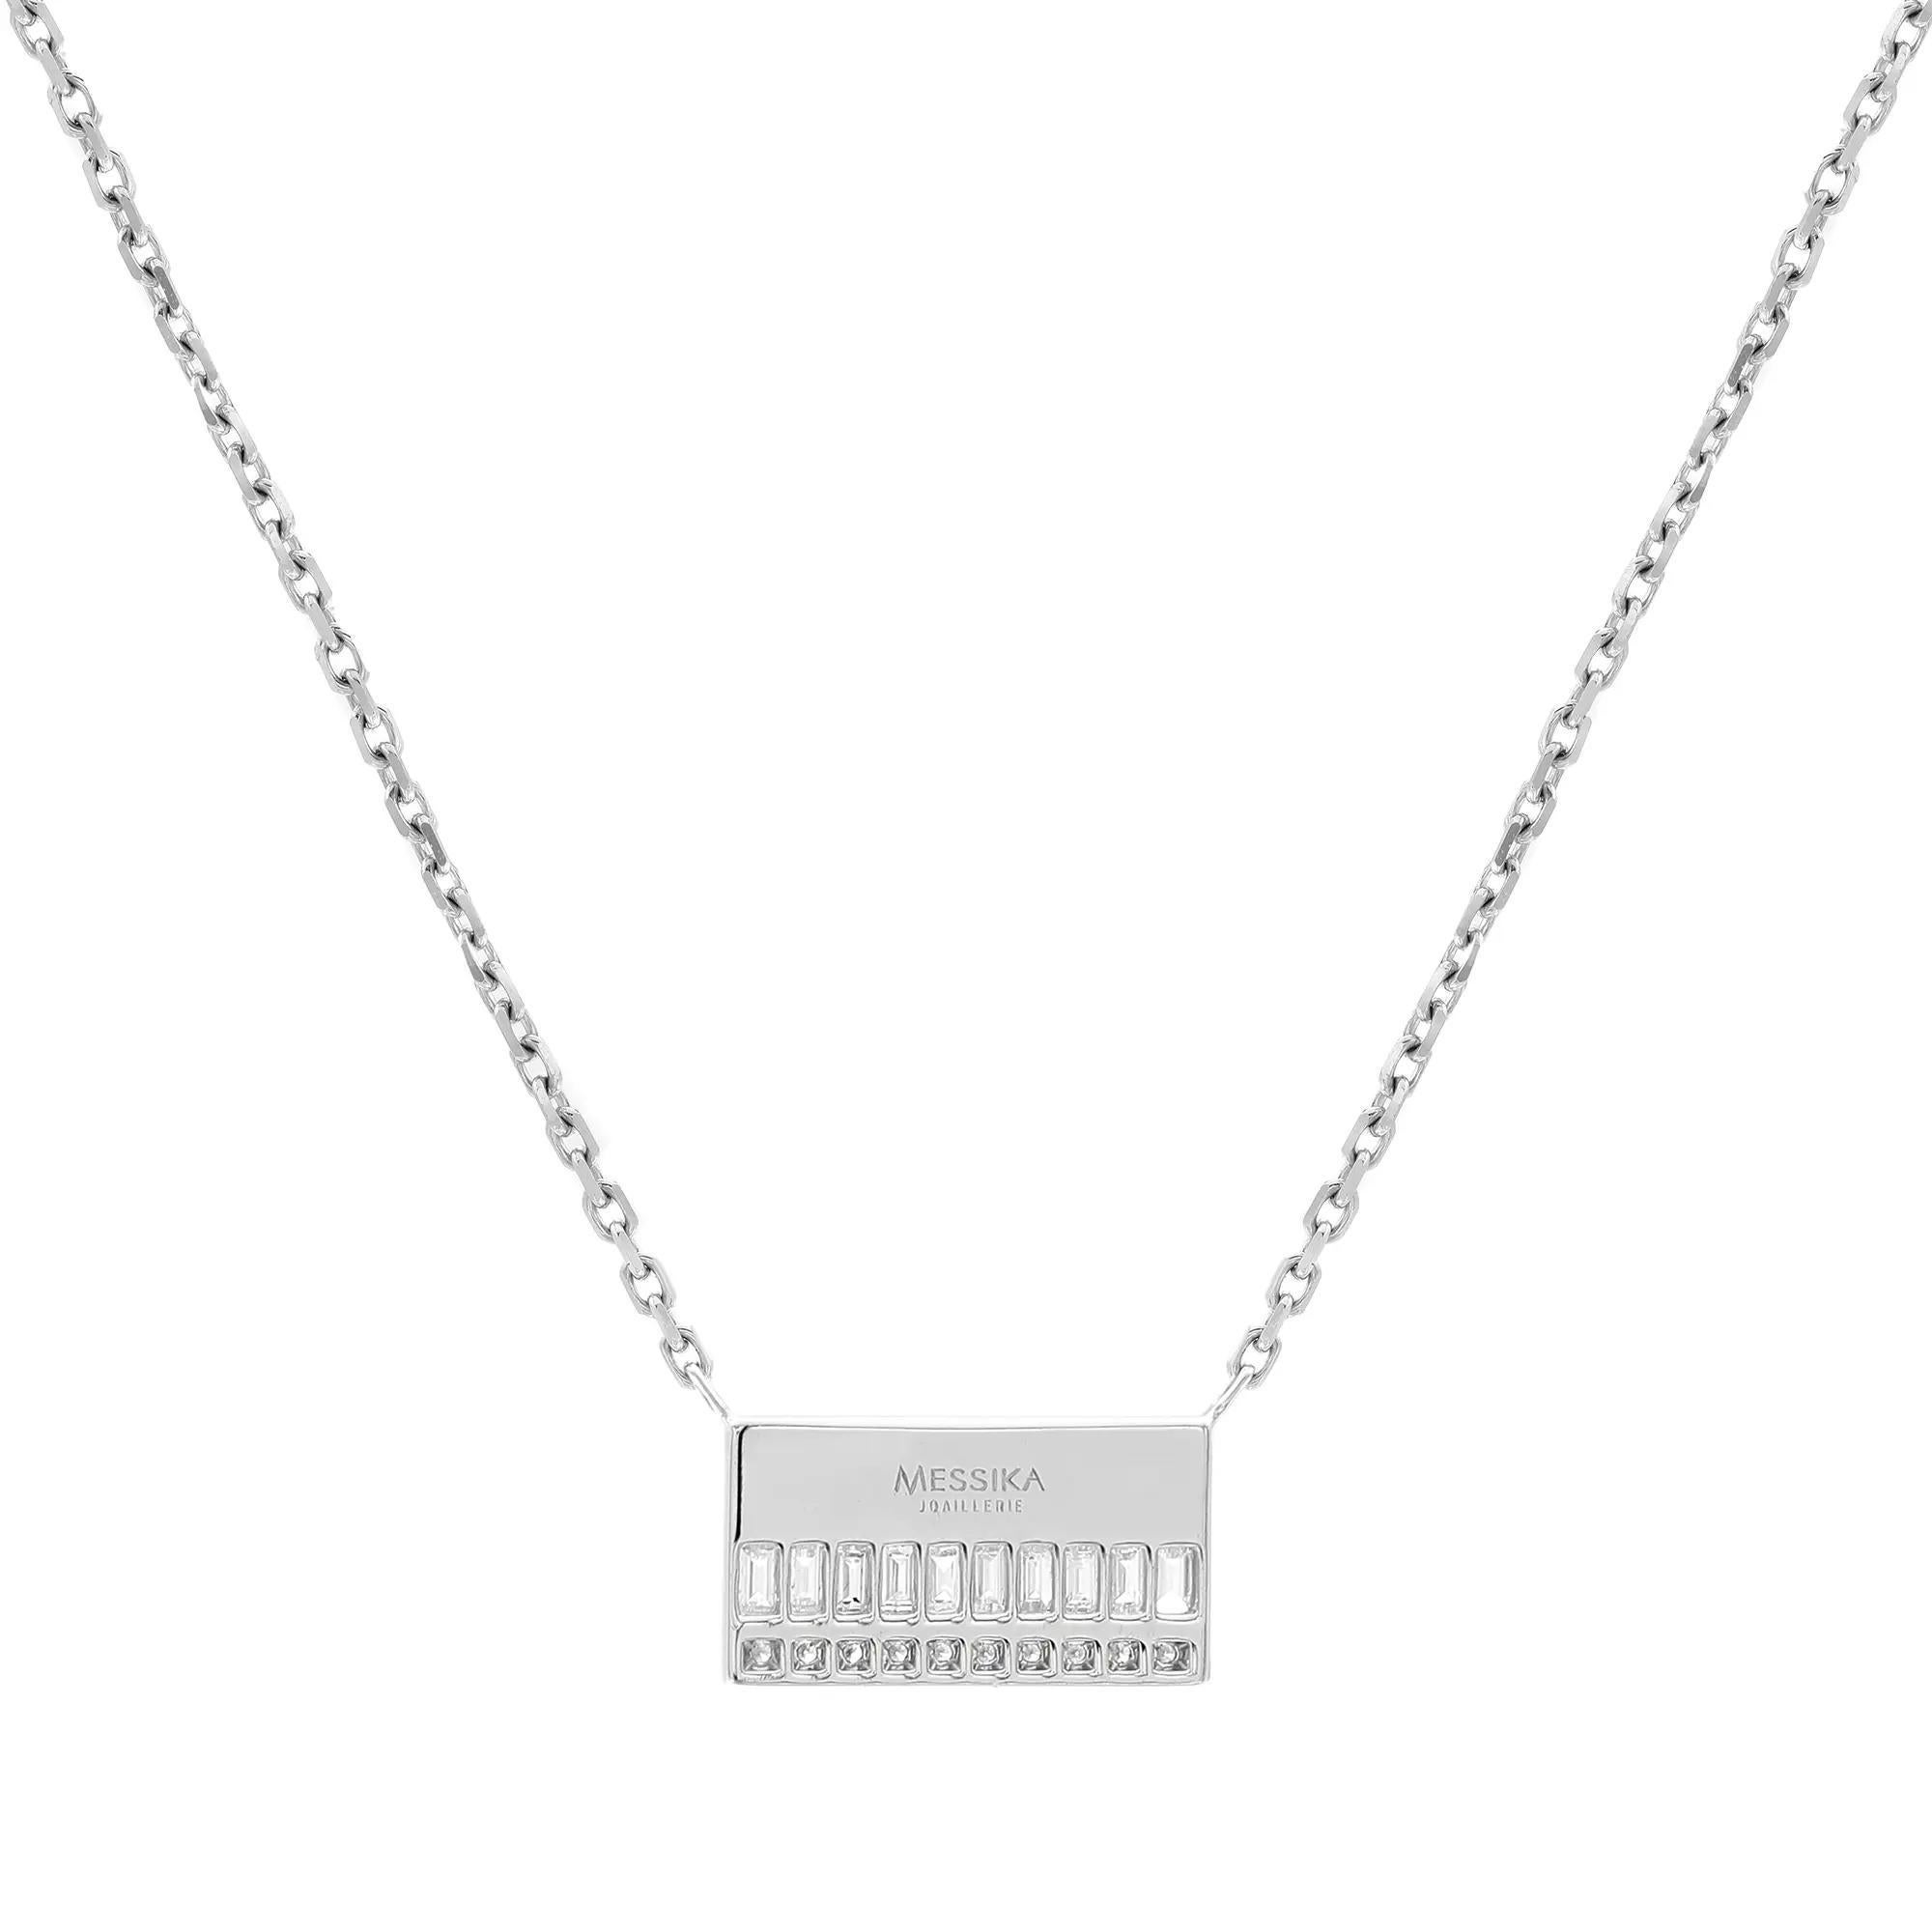 Modern Messika 0.72Cttw Liz Diamond Pendant Chain Necklace 18K White Gold 17 Inches For Sale